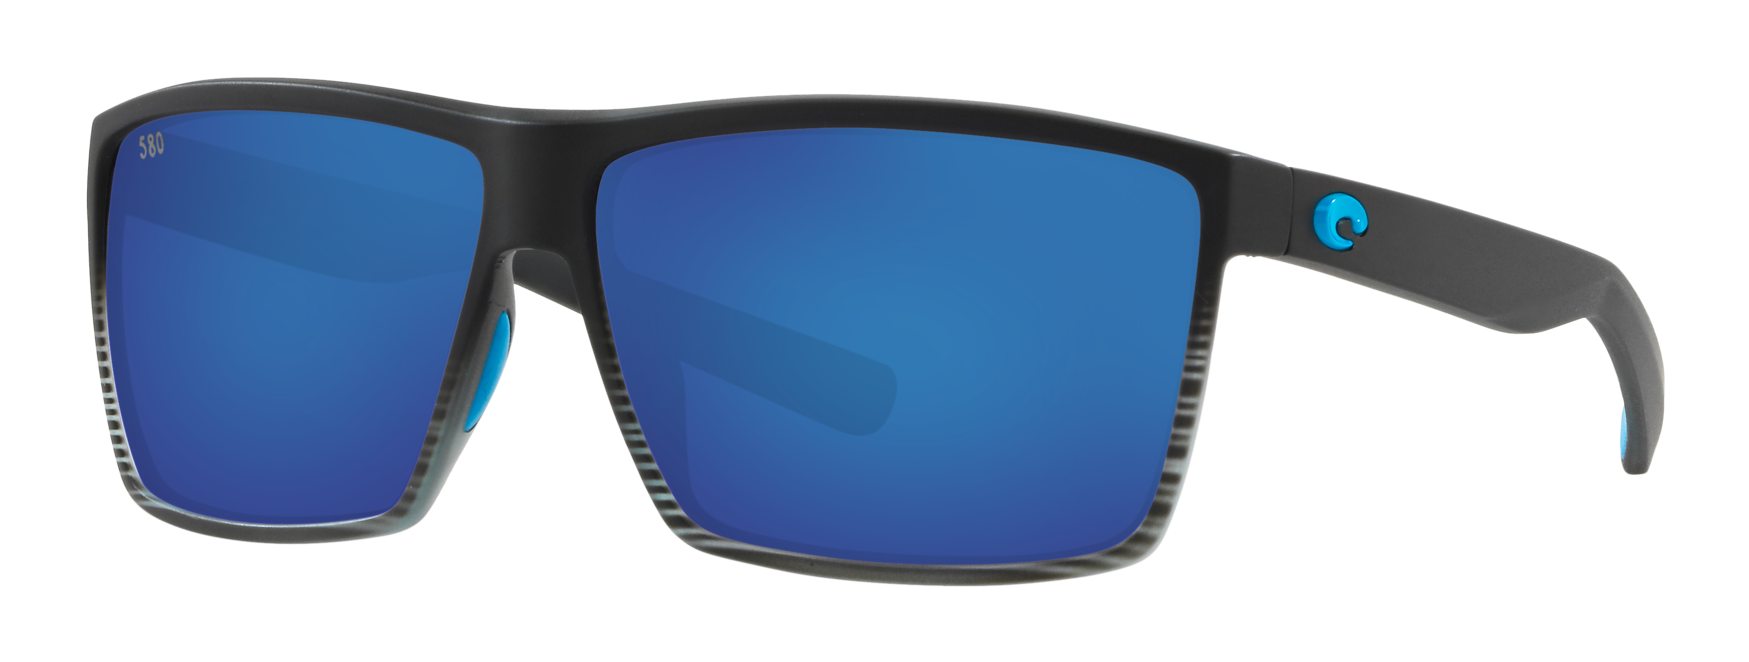 costa rincon polarized sunglasses in black and blue with blue lenses